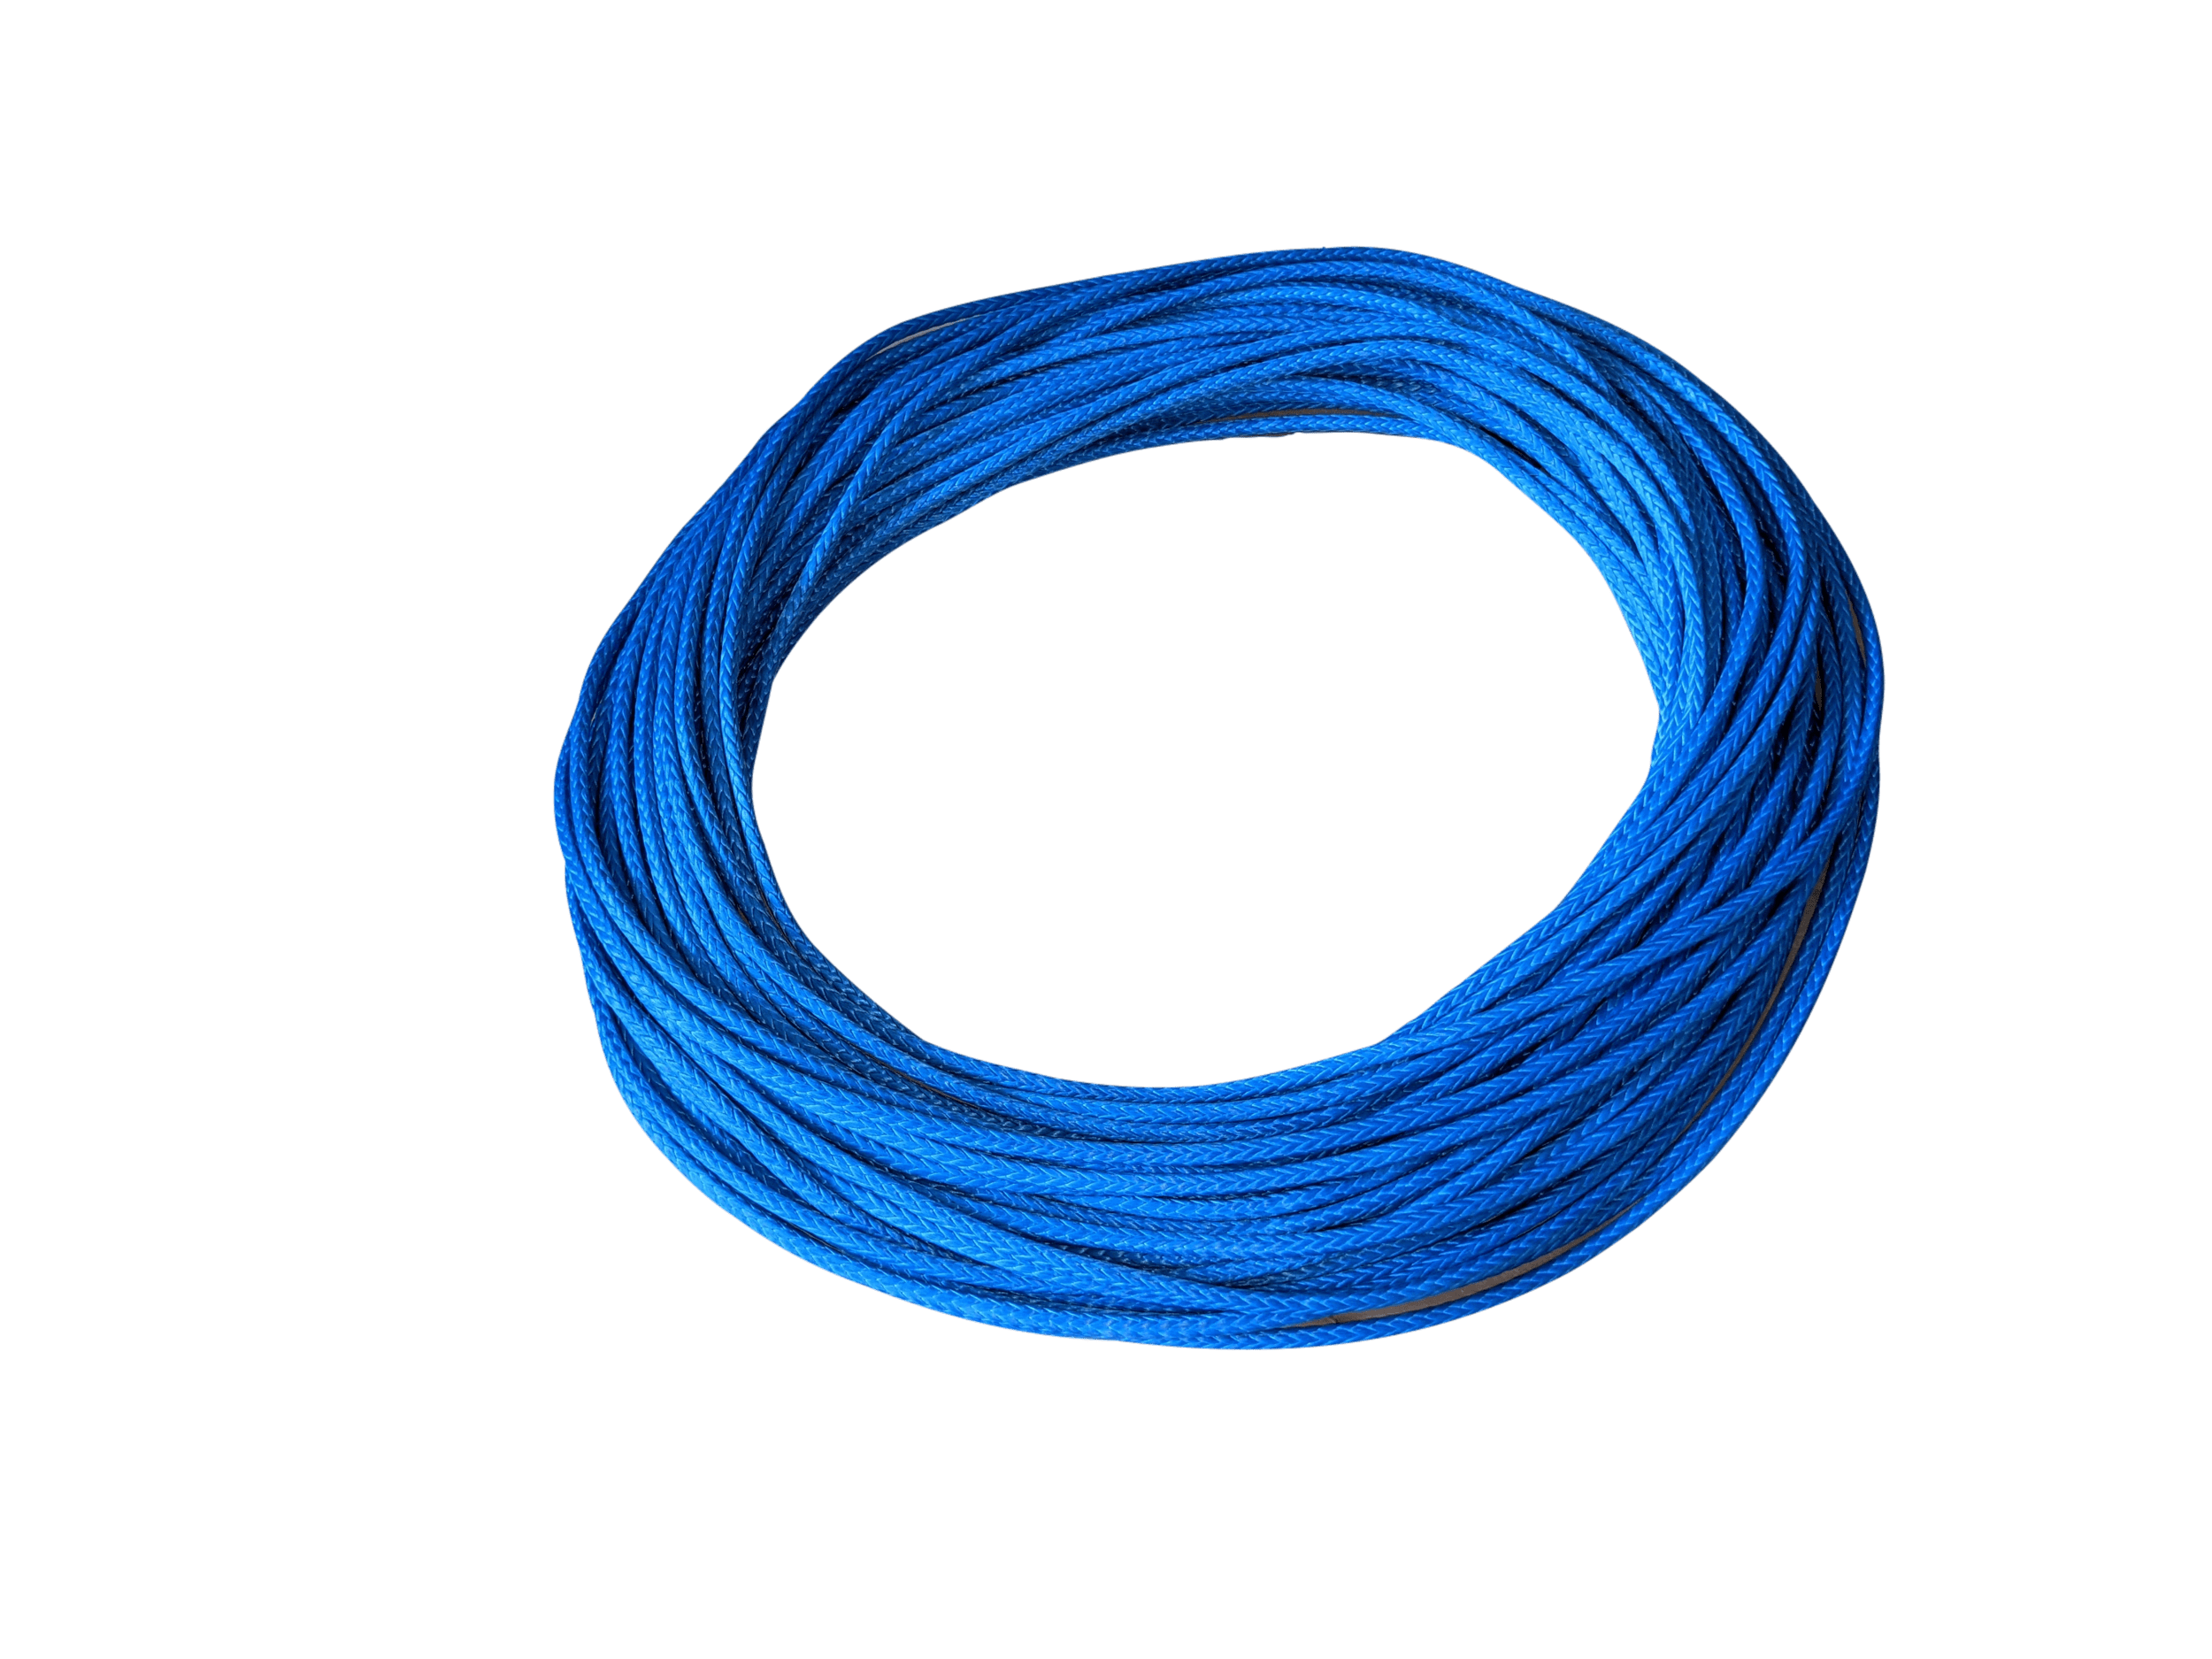 http://extremegear.org/cdn/shop/products/amsteel-blue-dyneema-samson-rope-extremegear-org-1-32891688190236.png?v=1701200663